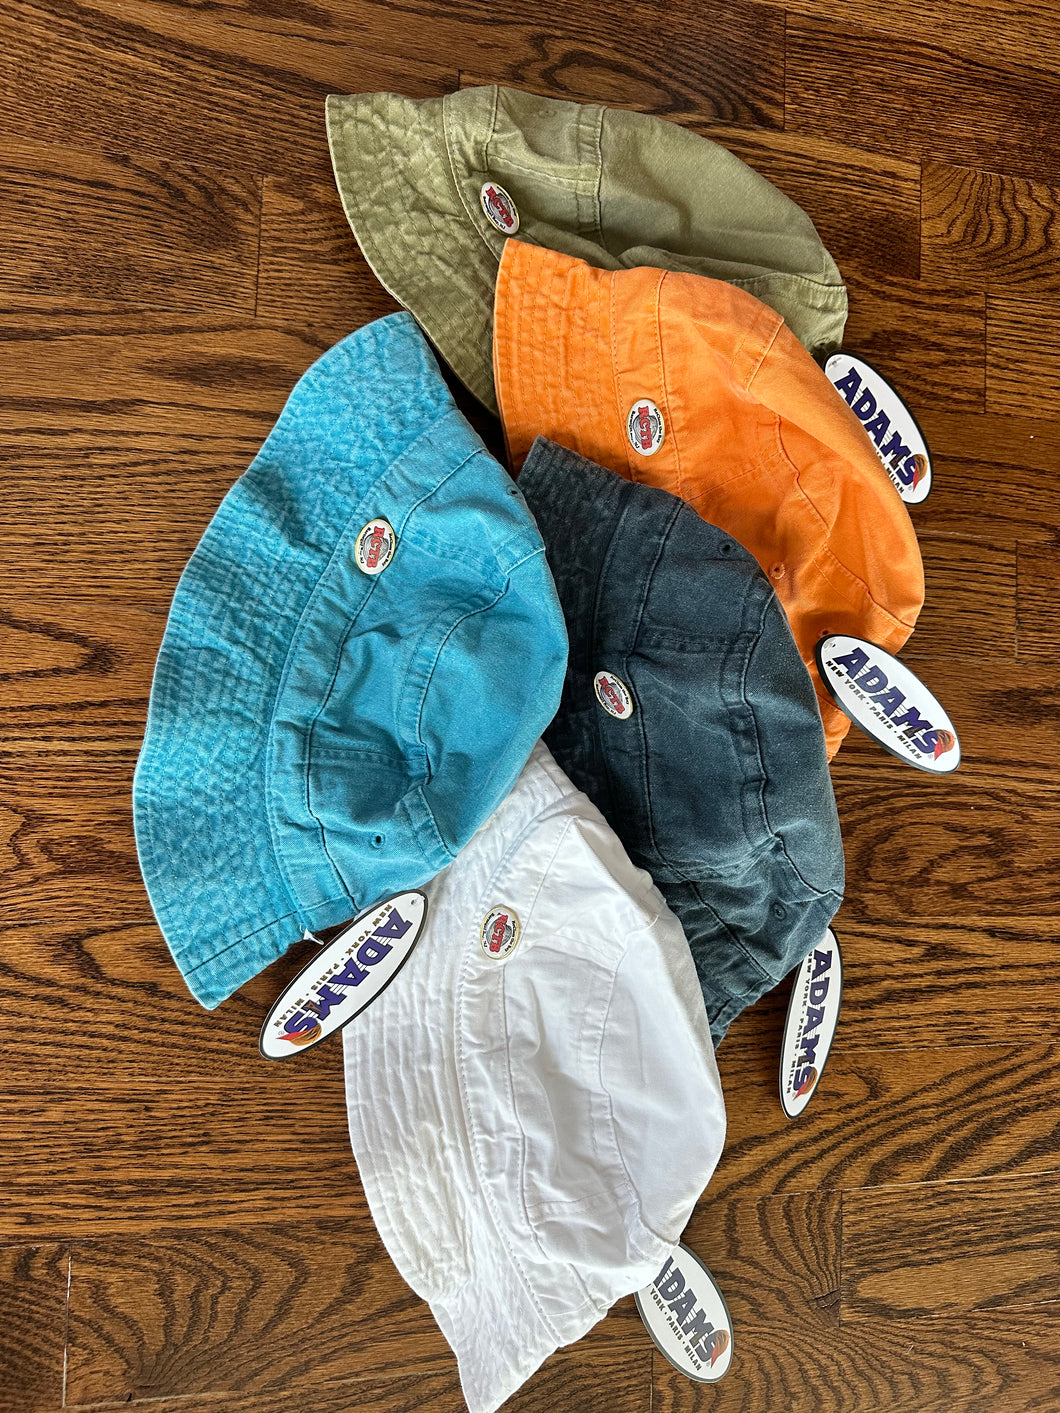 Hats: Bucket Hats with a RCTB Pin